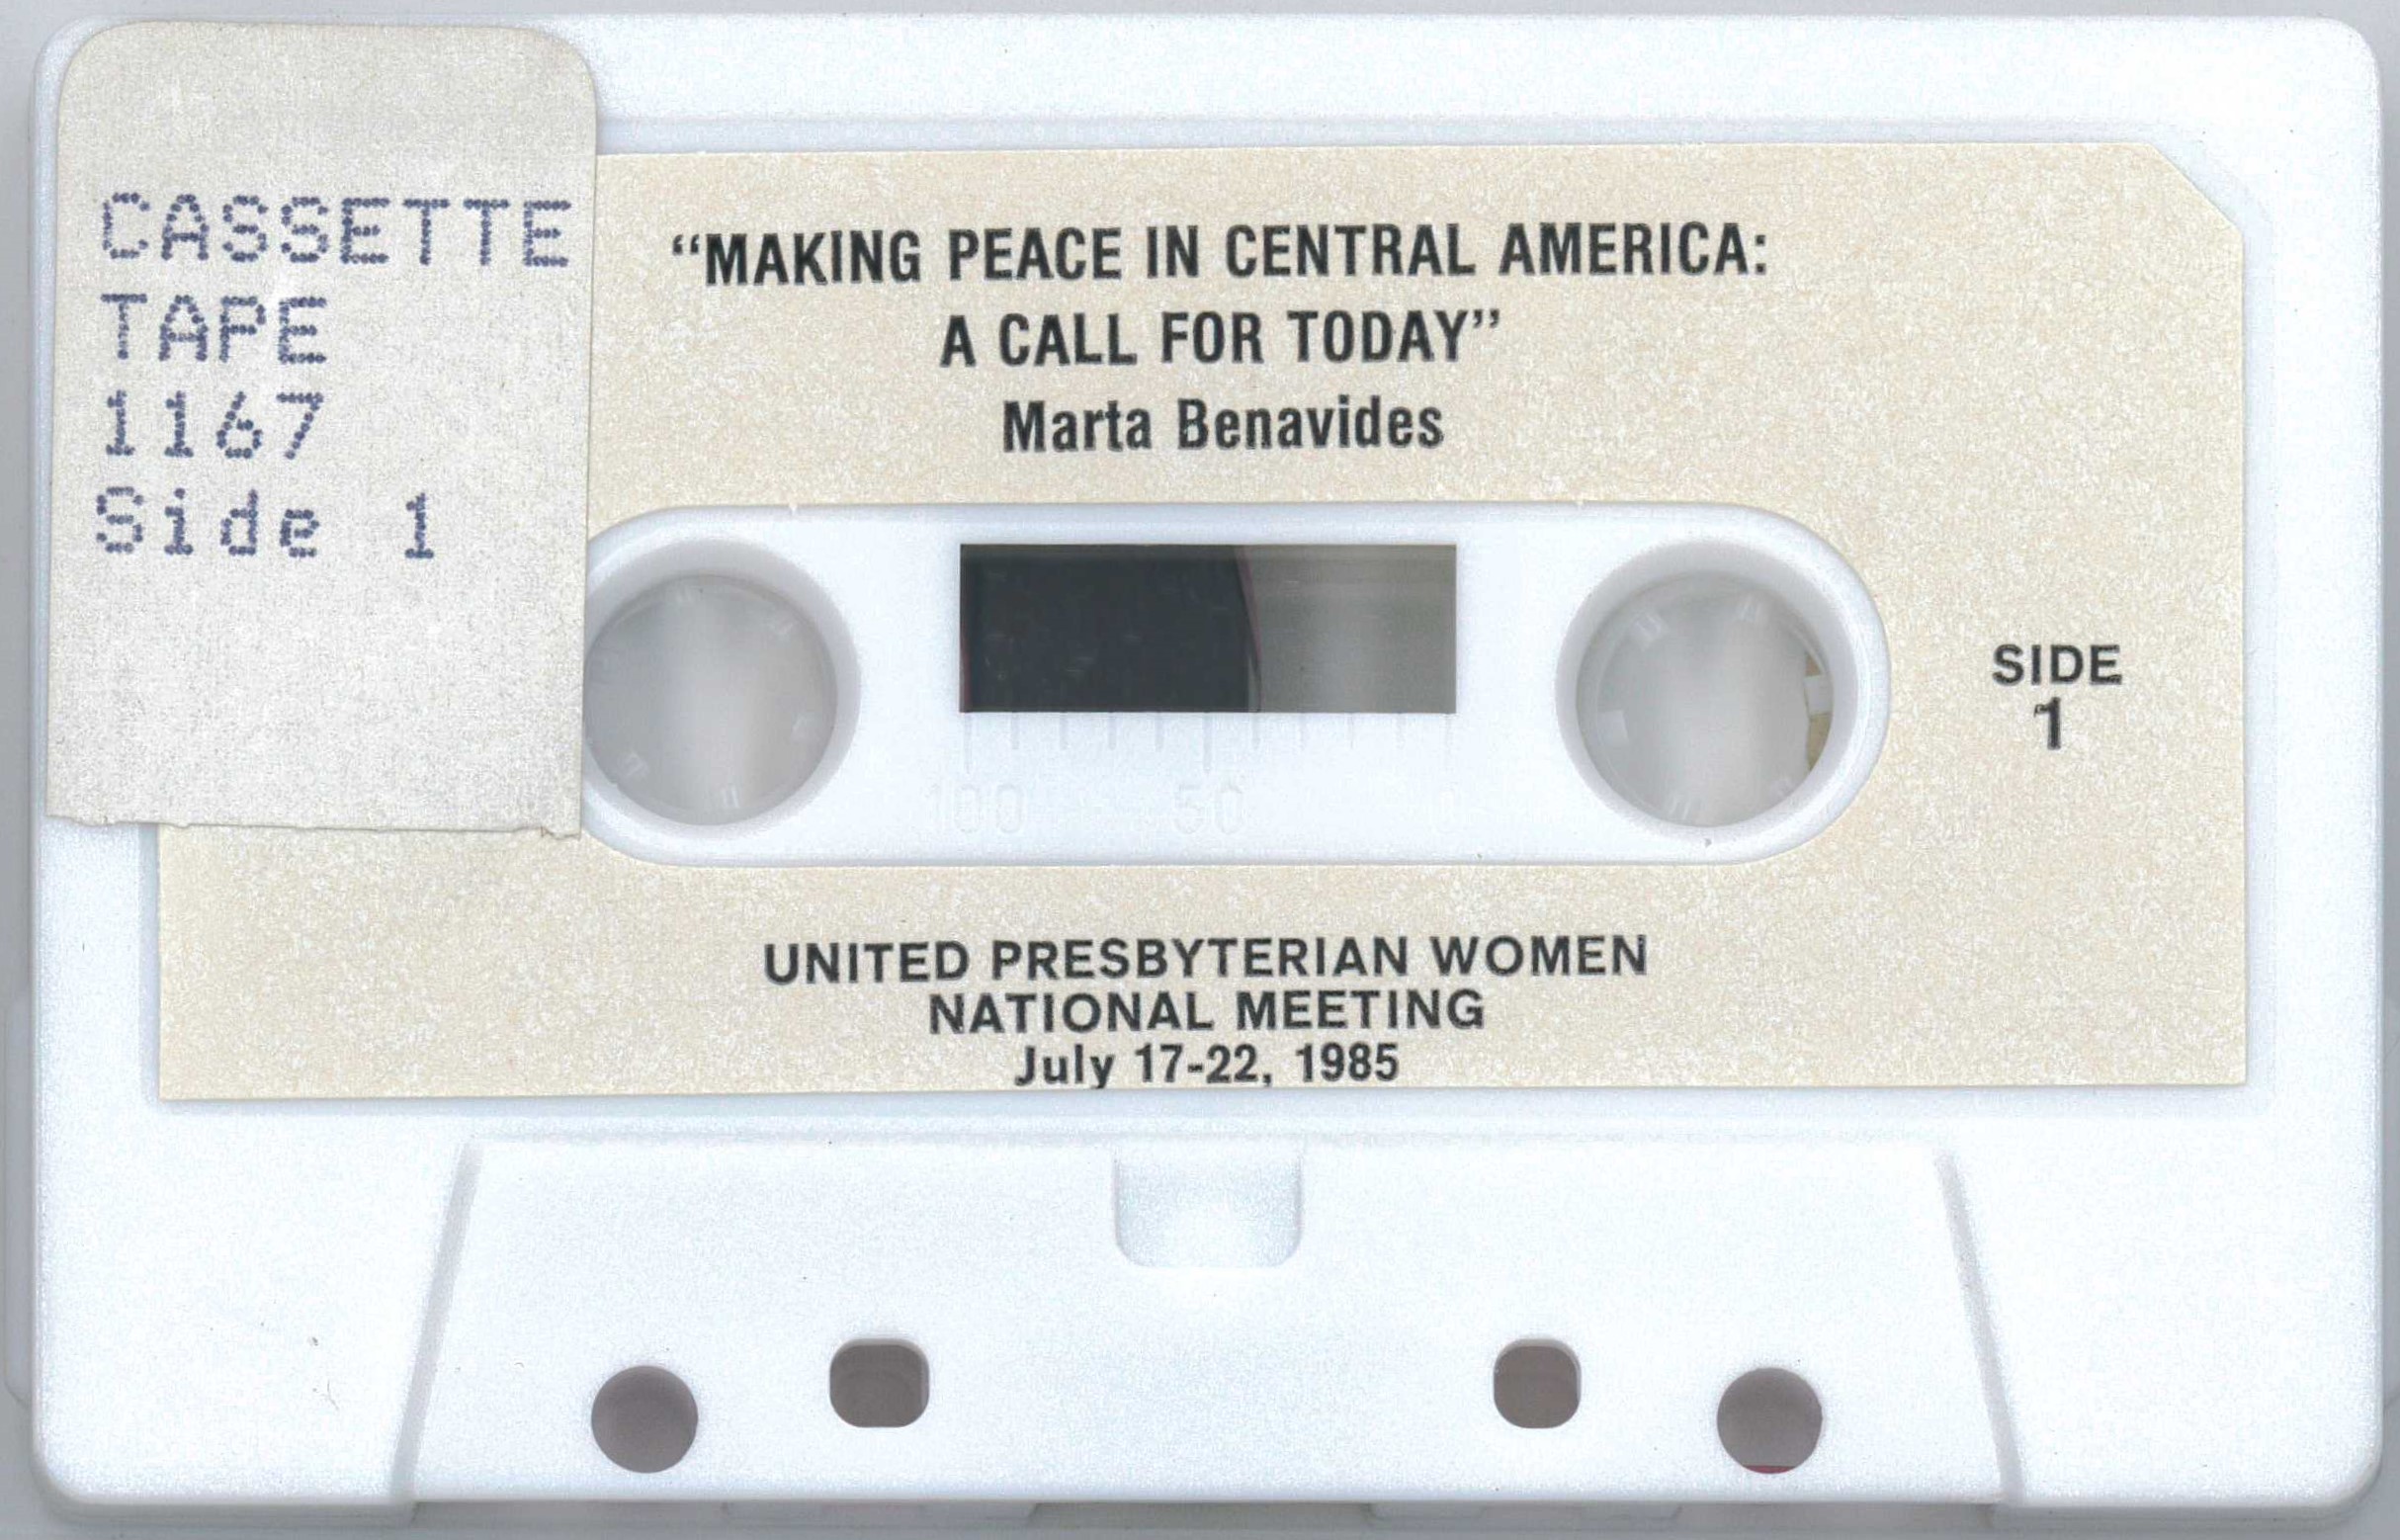 Making peace in Central America : a call for today, Marta Benavides, 1985